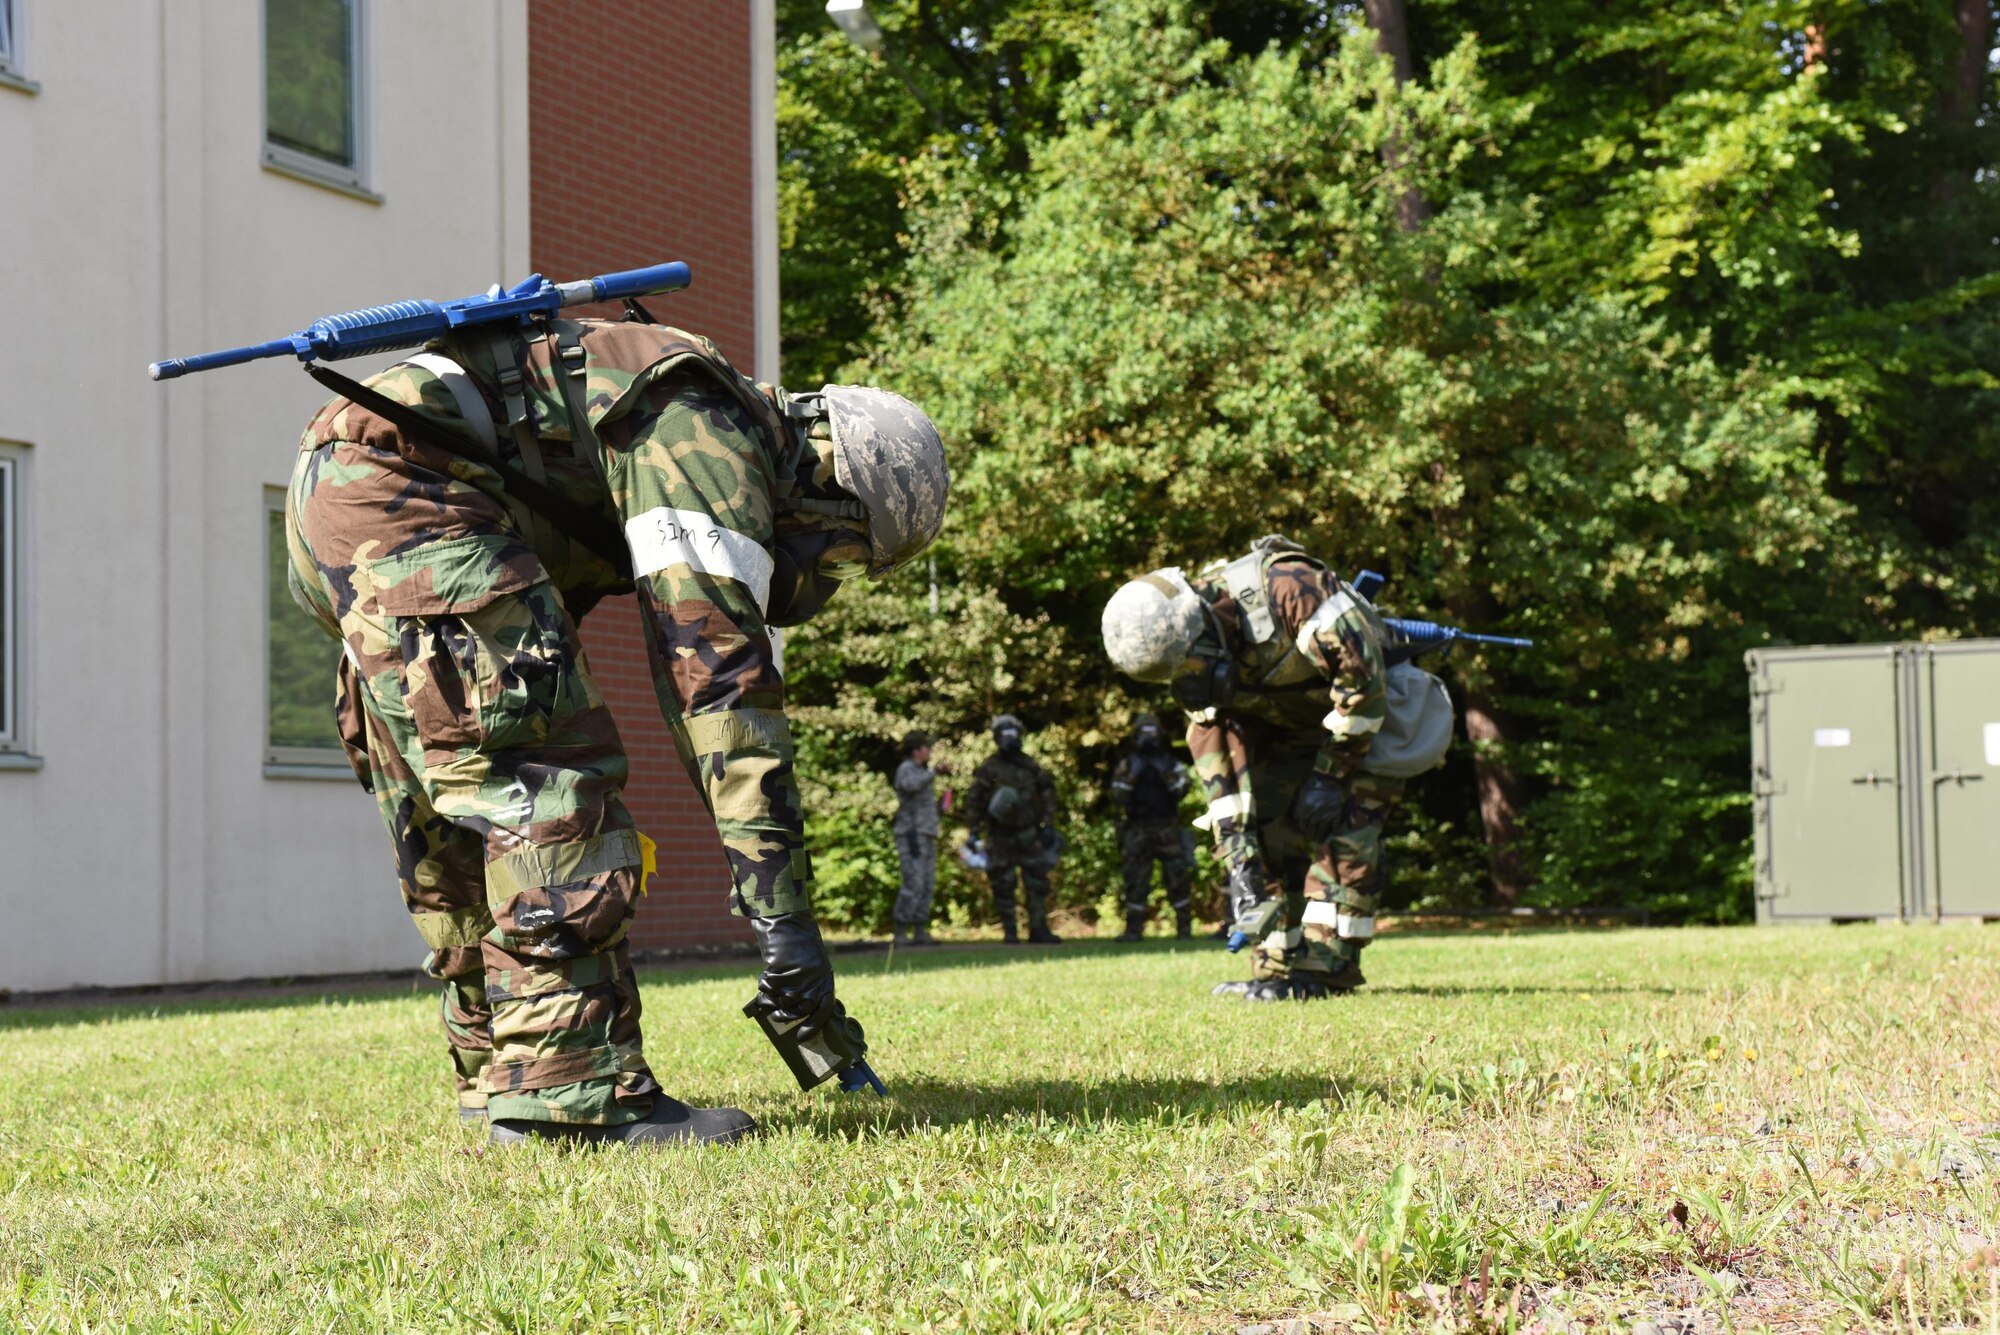 Emergency management specialists practice chemical warfare tasks during a simulated attack at the Silver Flag training site at Ramstein Air Base, Germany, Aug. 9, 2017. he training was part of an exercise that allowed Oklahoma Air National Guardsmen from the 137th Special Operations Wing, Will Rogers Air National Guard Base, Oklahoma City, and the 138th Fighter Wing, Tulsa Air National Guard Base, Tulsa, Oklahoma, to integrate different career fields and units for a realistic contingency environment.(U.S. Air National Guard photo by Senior Airman Caitlin G. Carnes/Released)